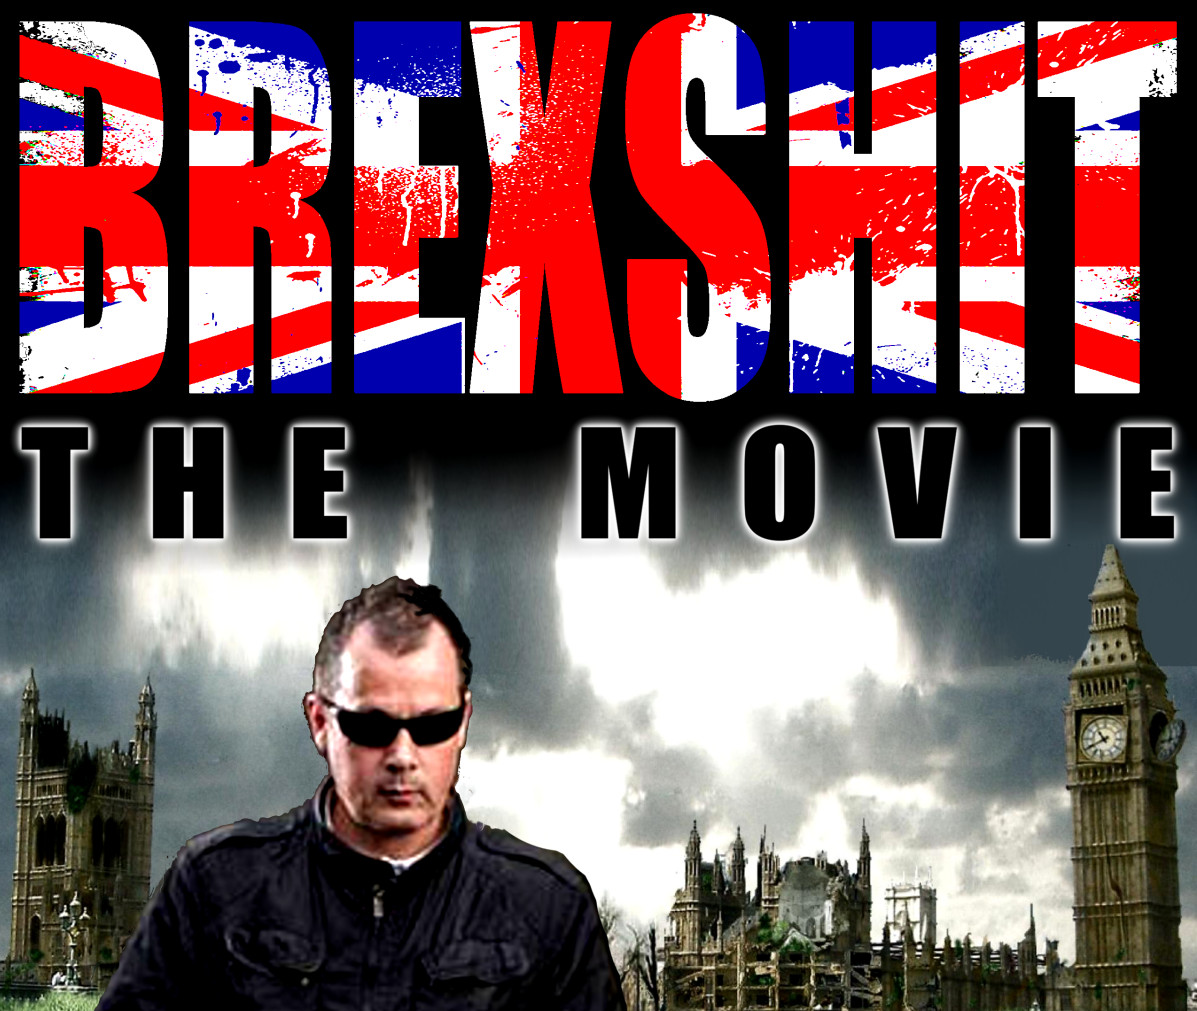 A movie about all that is bad in the United Kingdom, leading to the corrupt state it has become